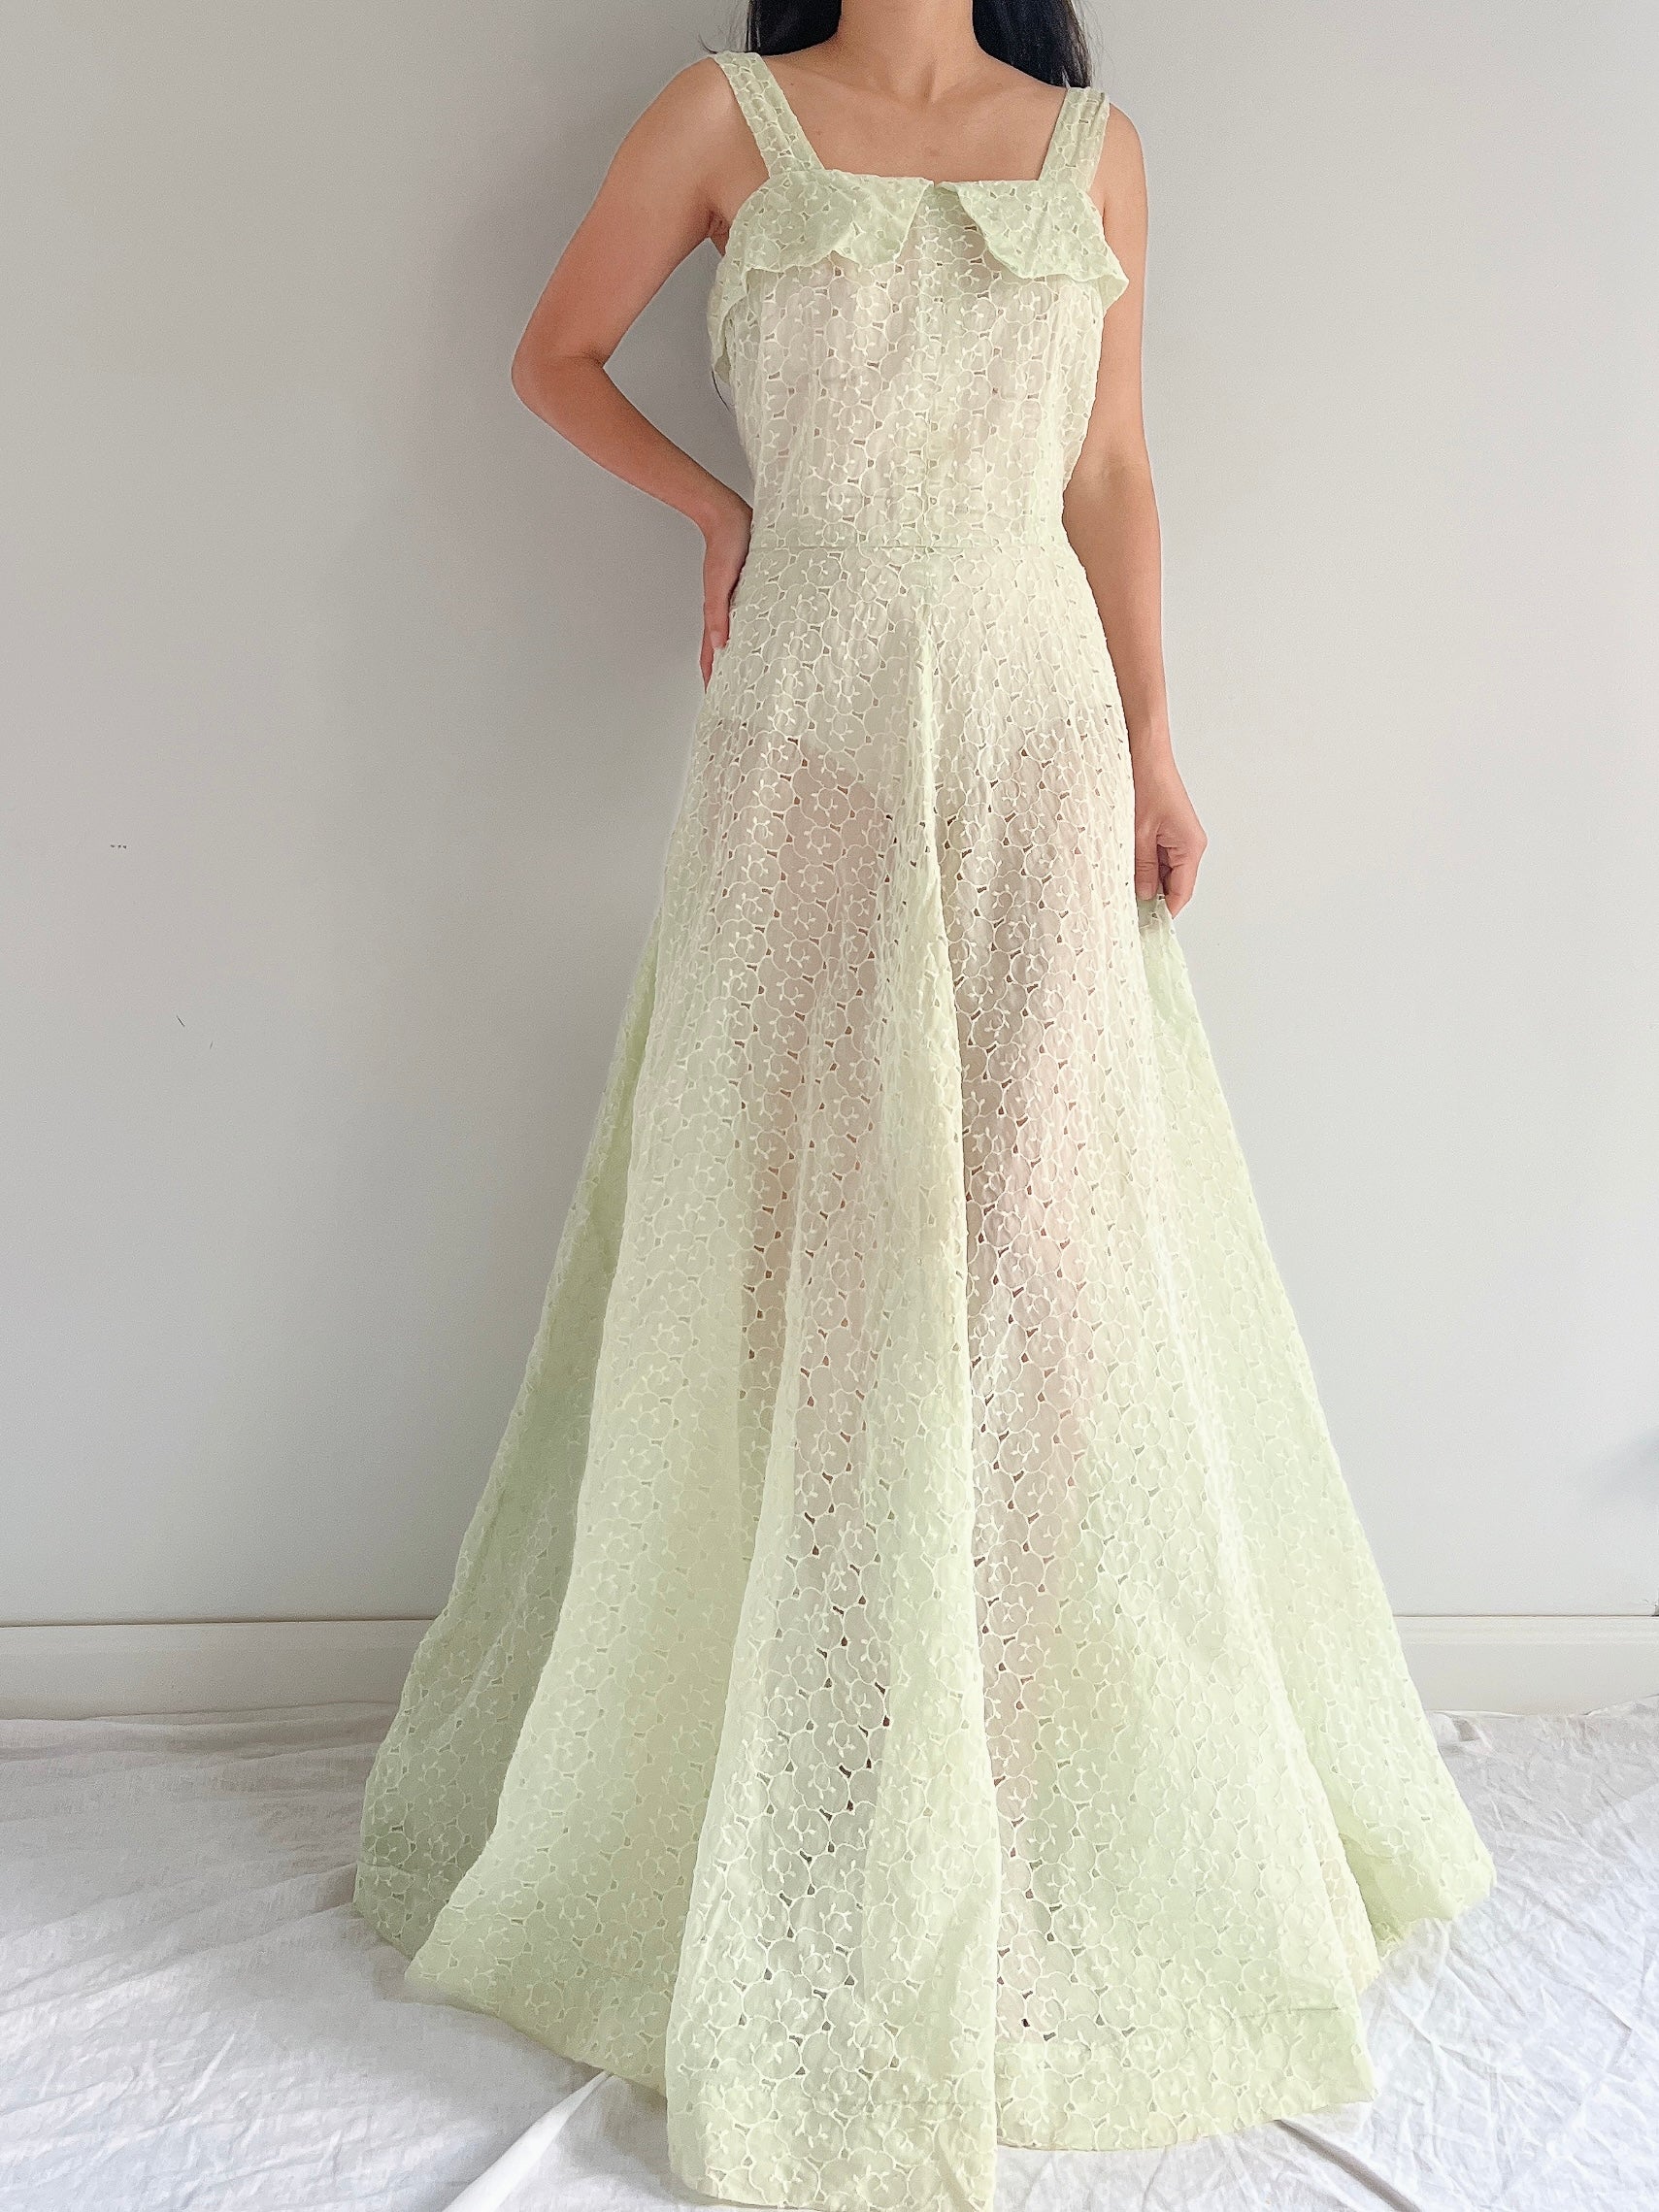 1940s/50s Mint Green Organdy Eyelet Gown - M